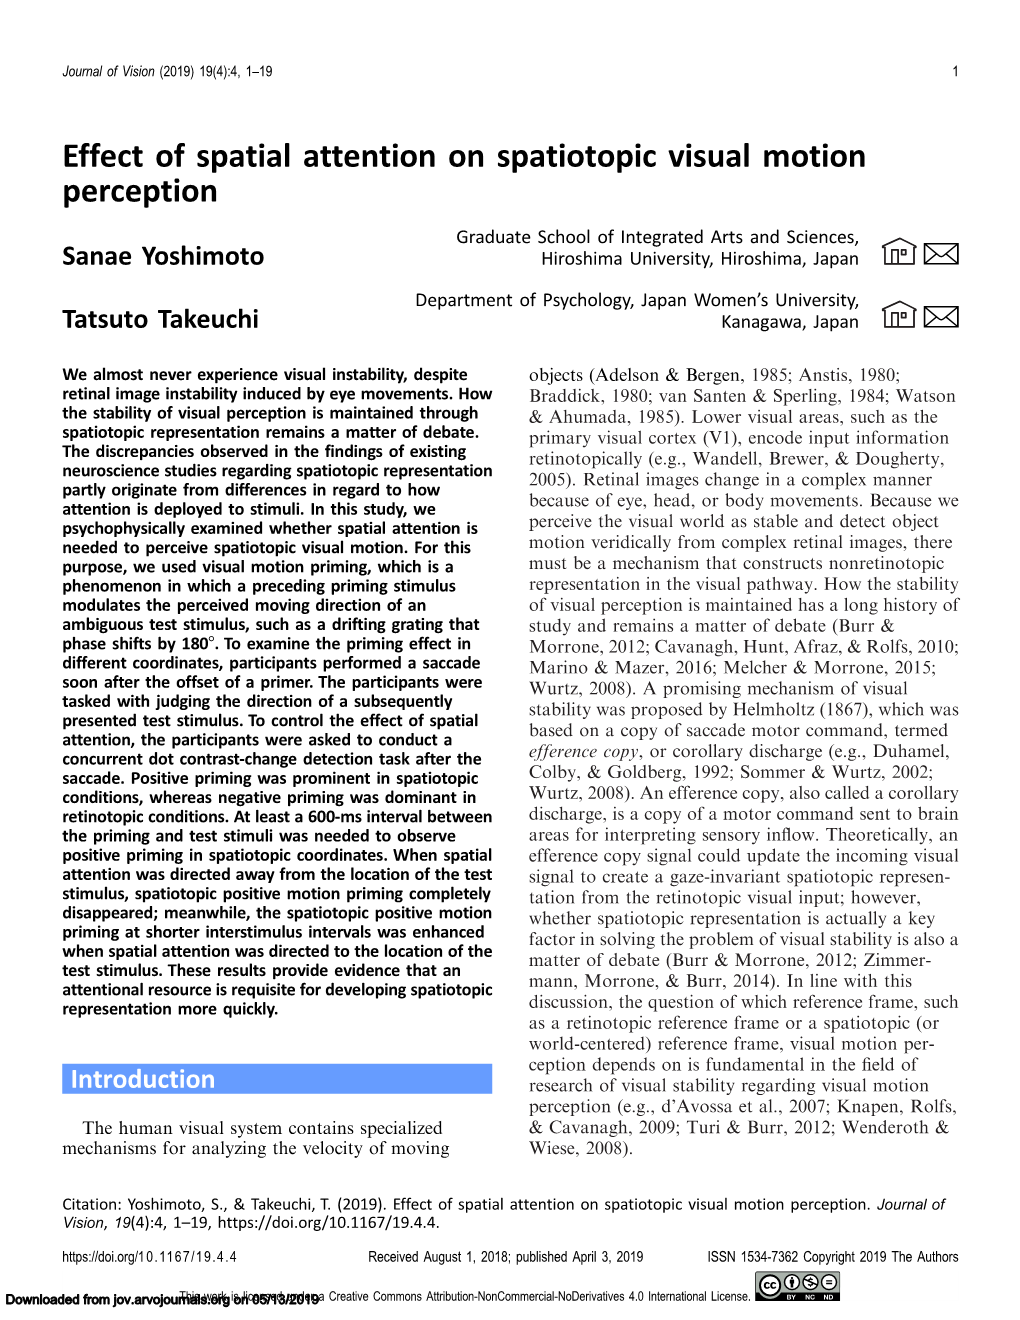 Effect of Spatial Attention on Spatiotopic Visual Motion Perception